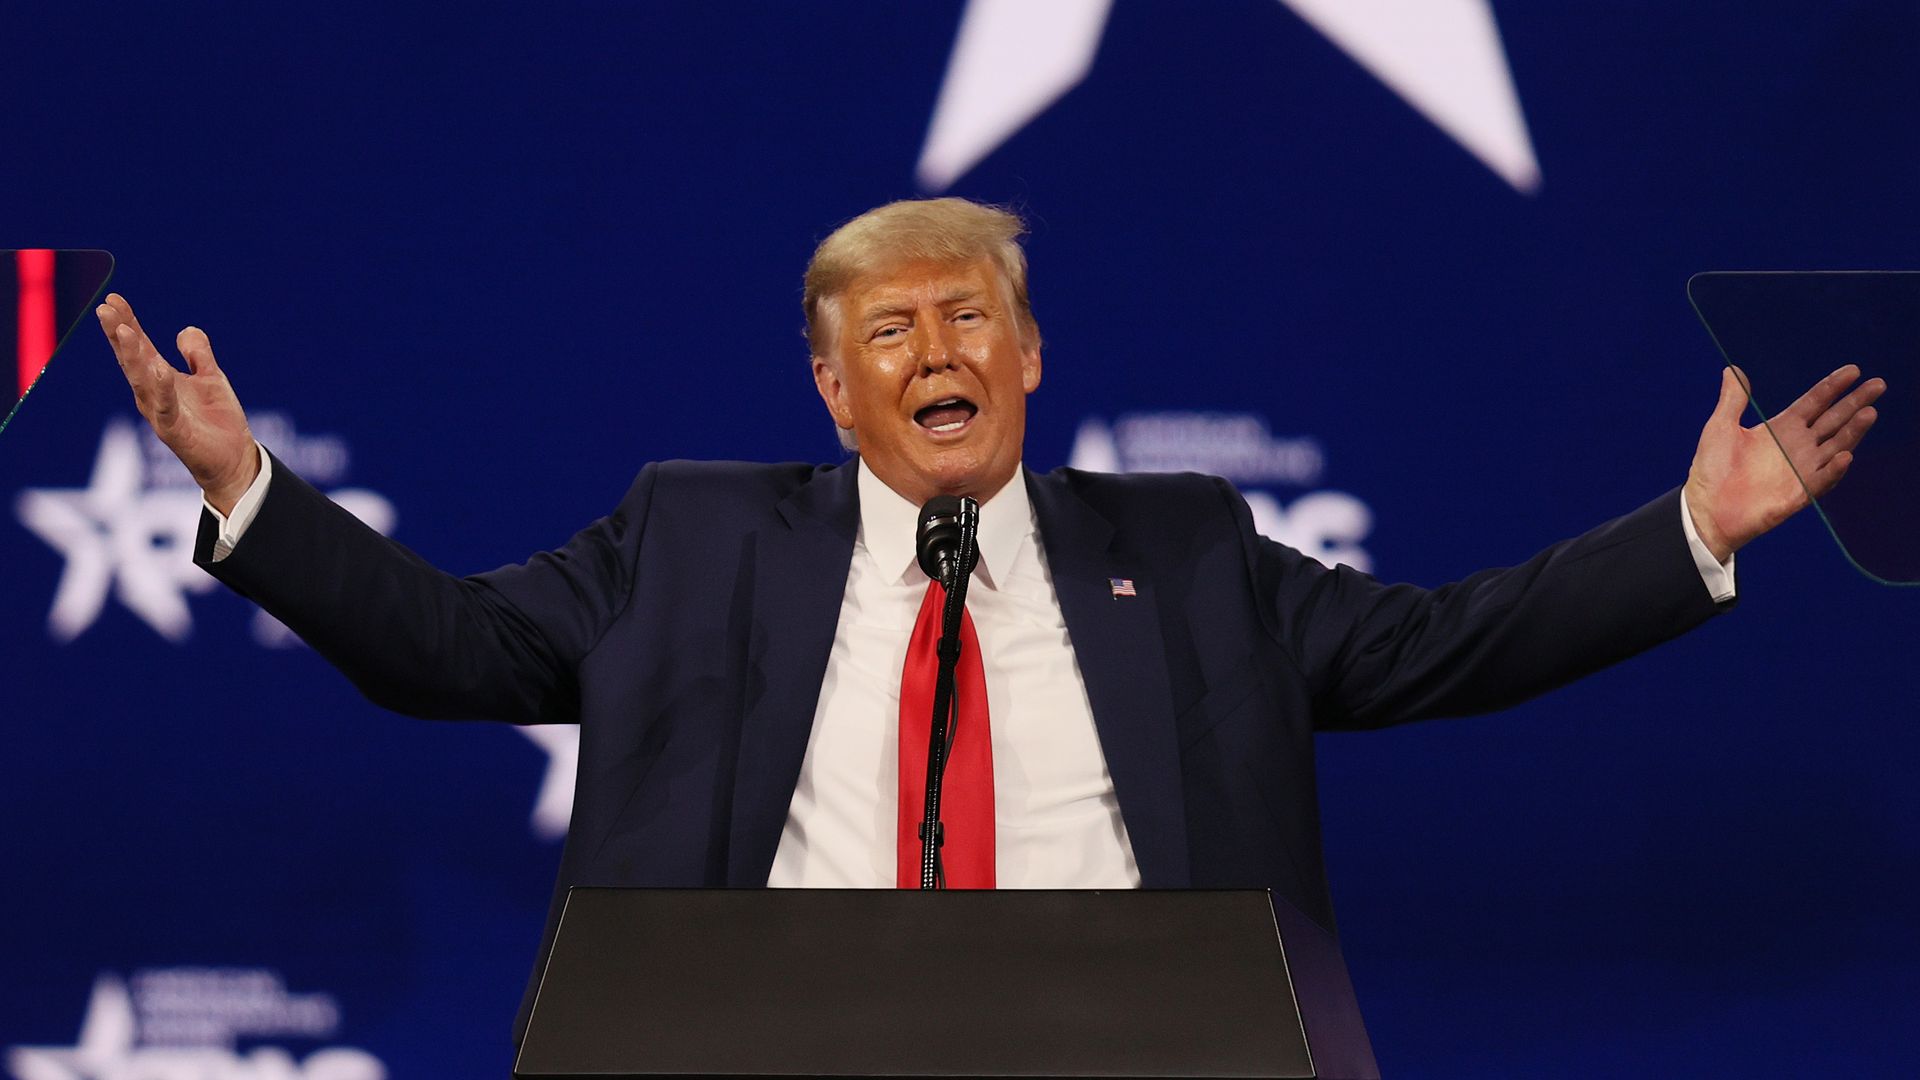 Former U.S. President Donald Trump addresses the Conservative Political Action Conference (CPAC) held in the Hyatt Regency on February 28, 2021 in Orlando, Florida. 